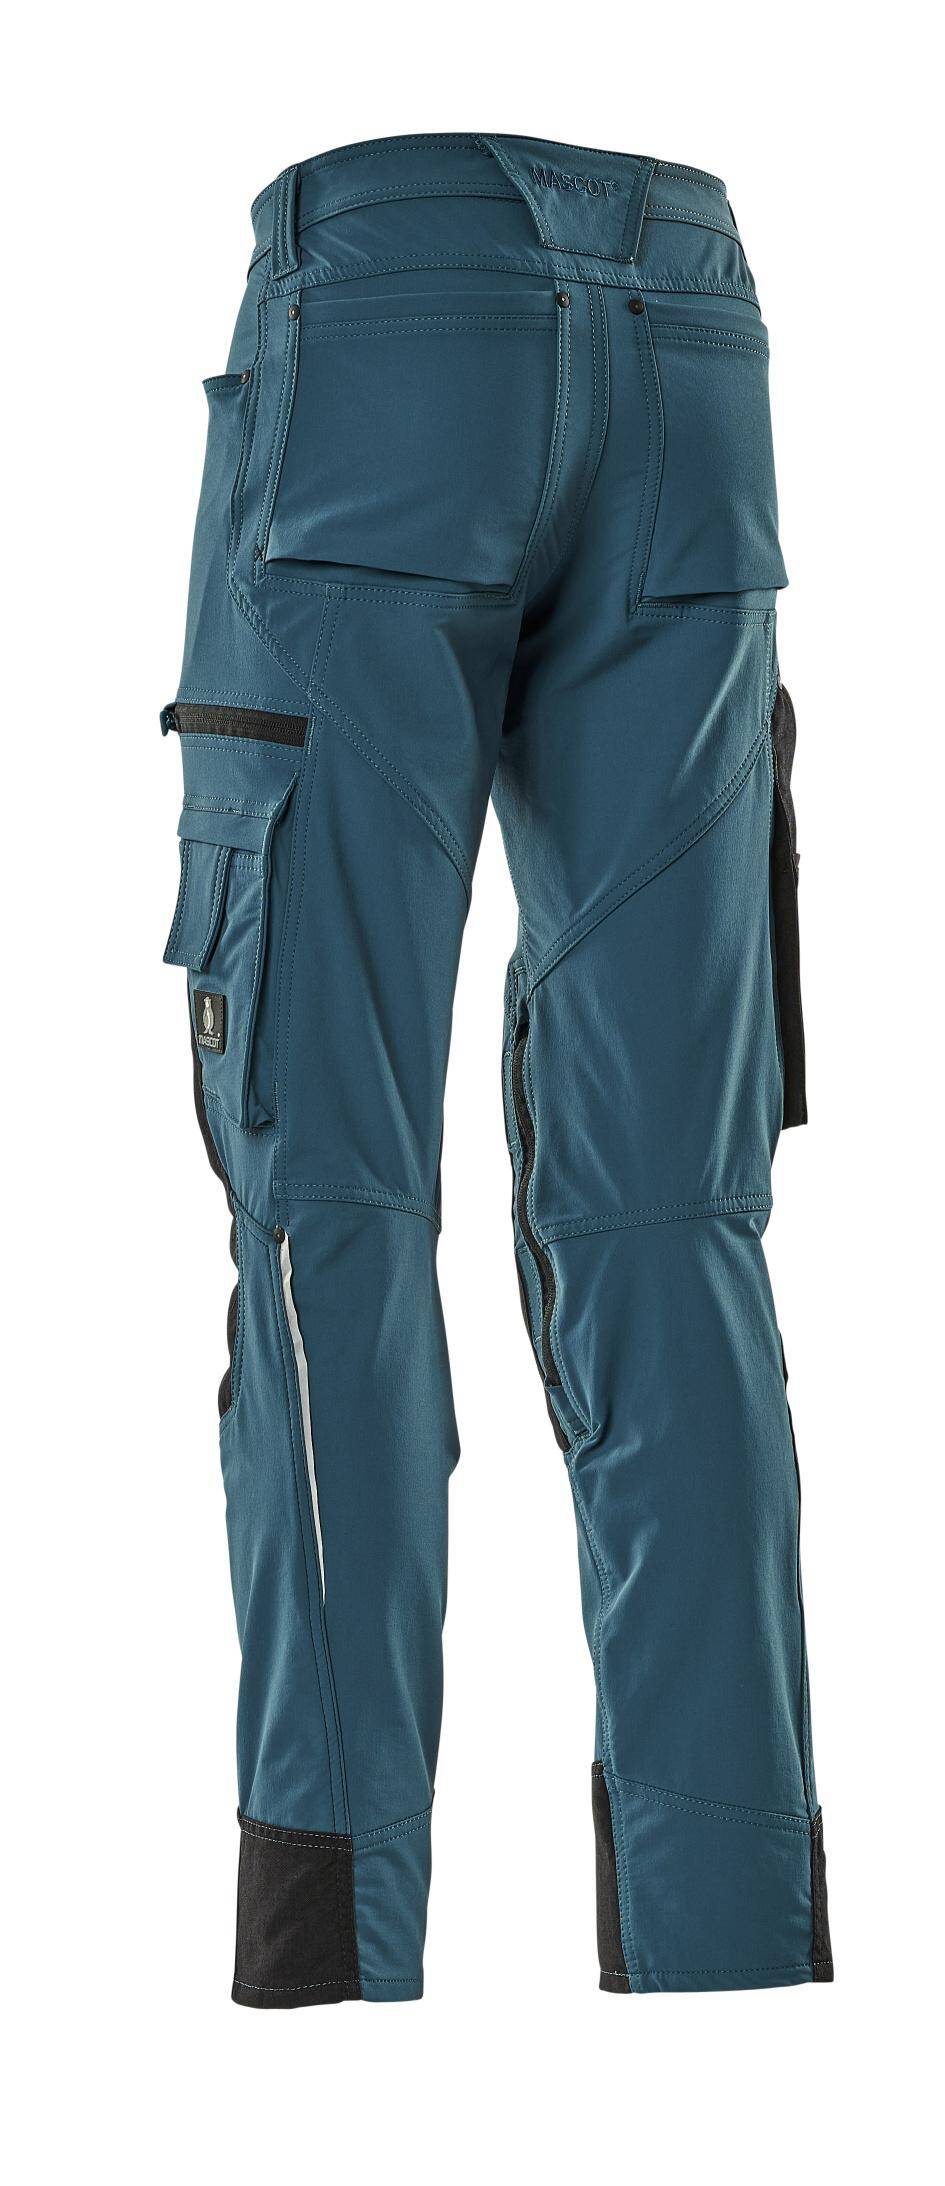 Trousers with kneepad pockets Advanced sand